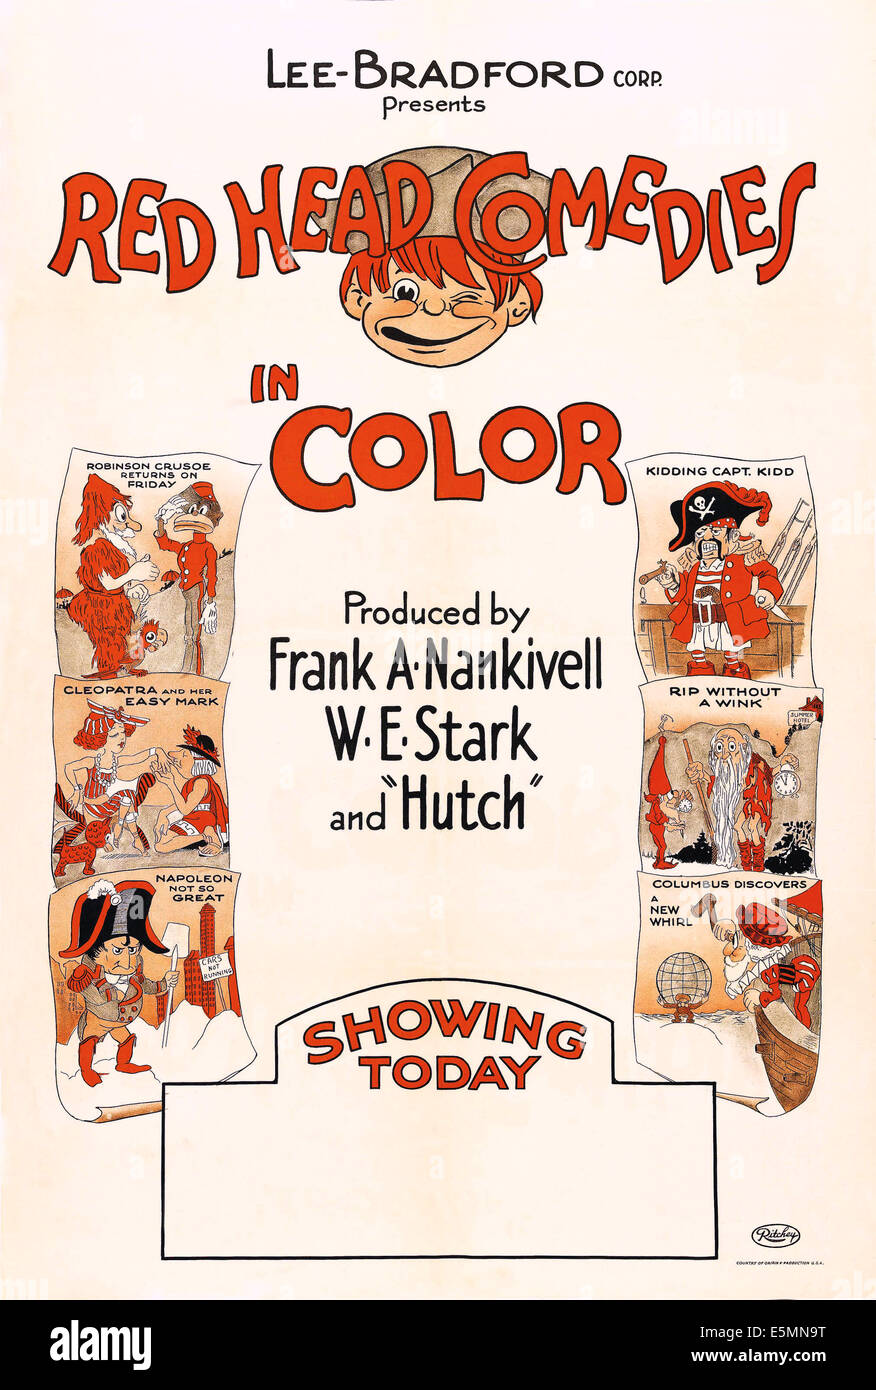 RED HEAS COMEDIES, stock US poster, 1923 Stock Photo